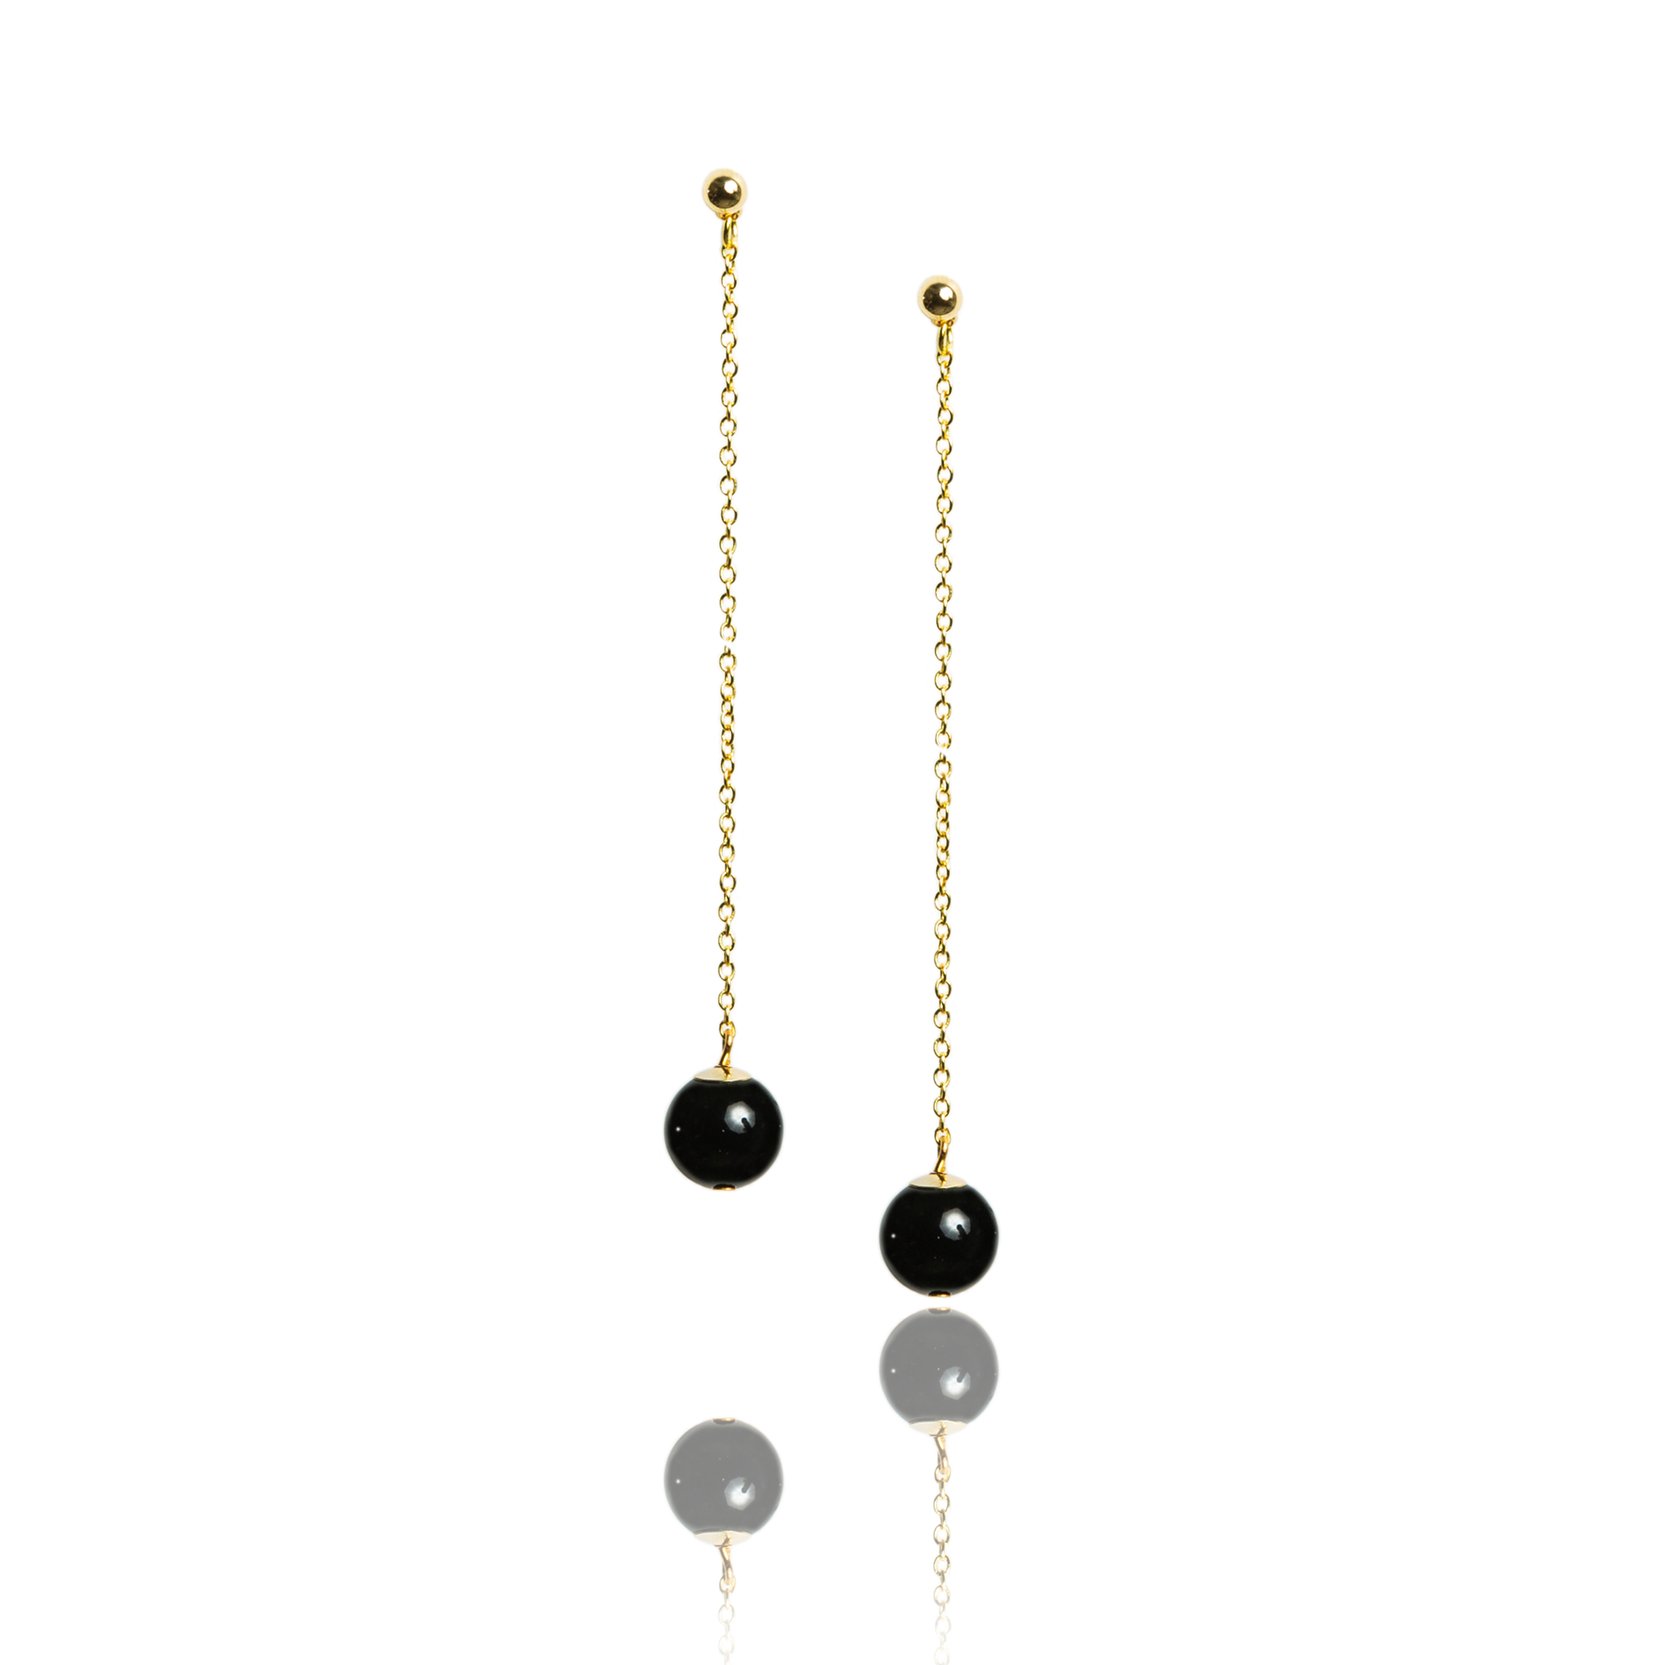 Earrings on a gold-plated chain with black agate